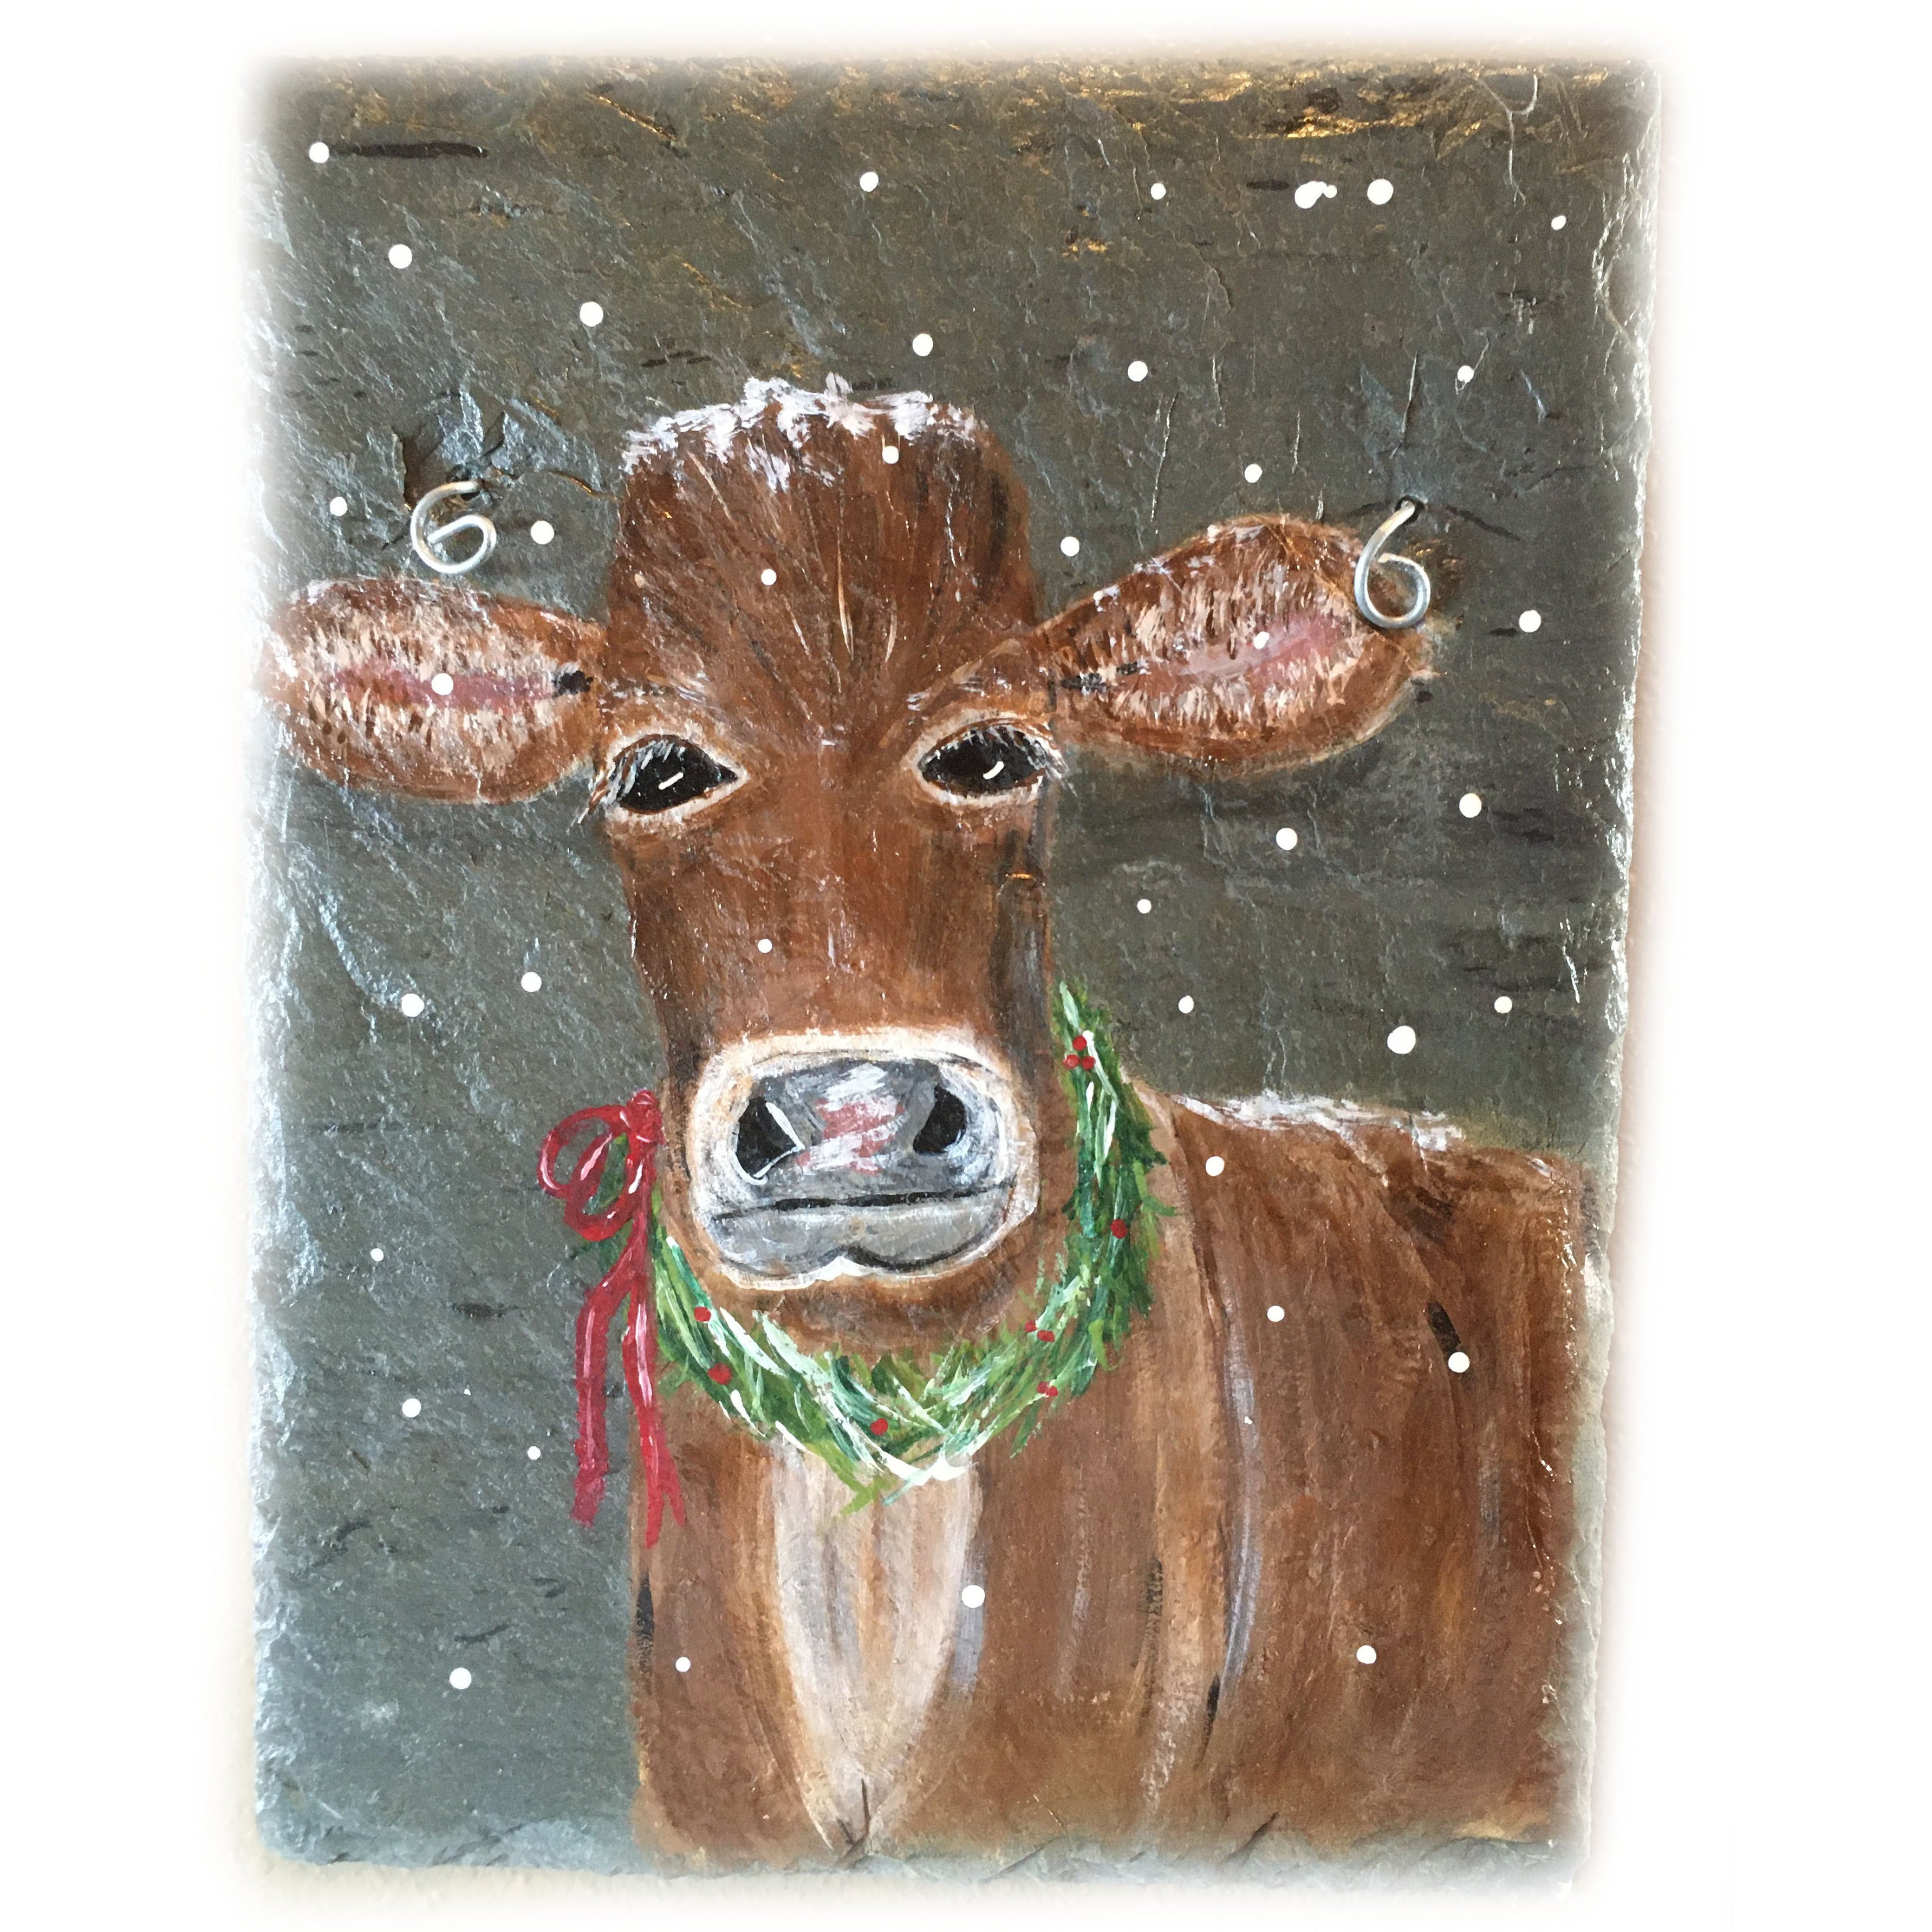 Rustic Christmas Jersey Cow Slate painting